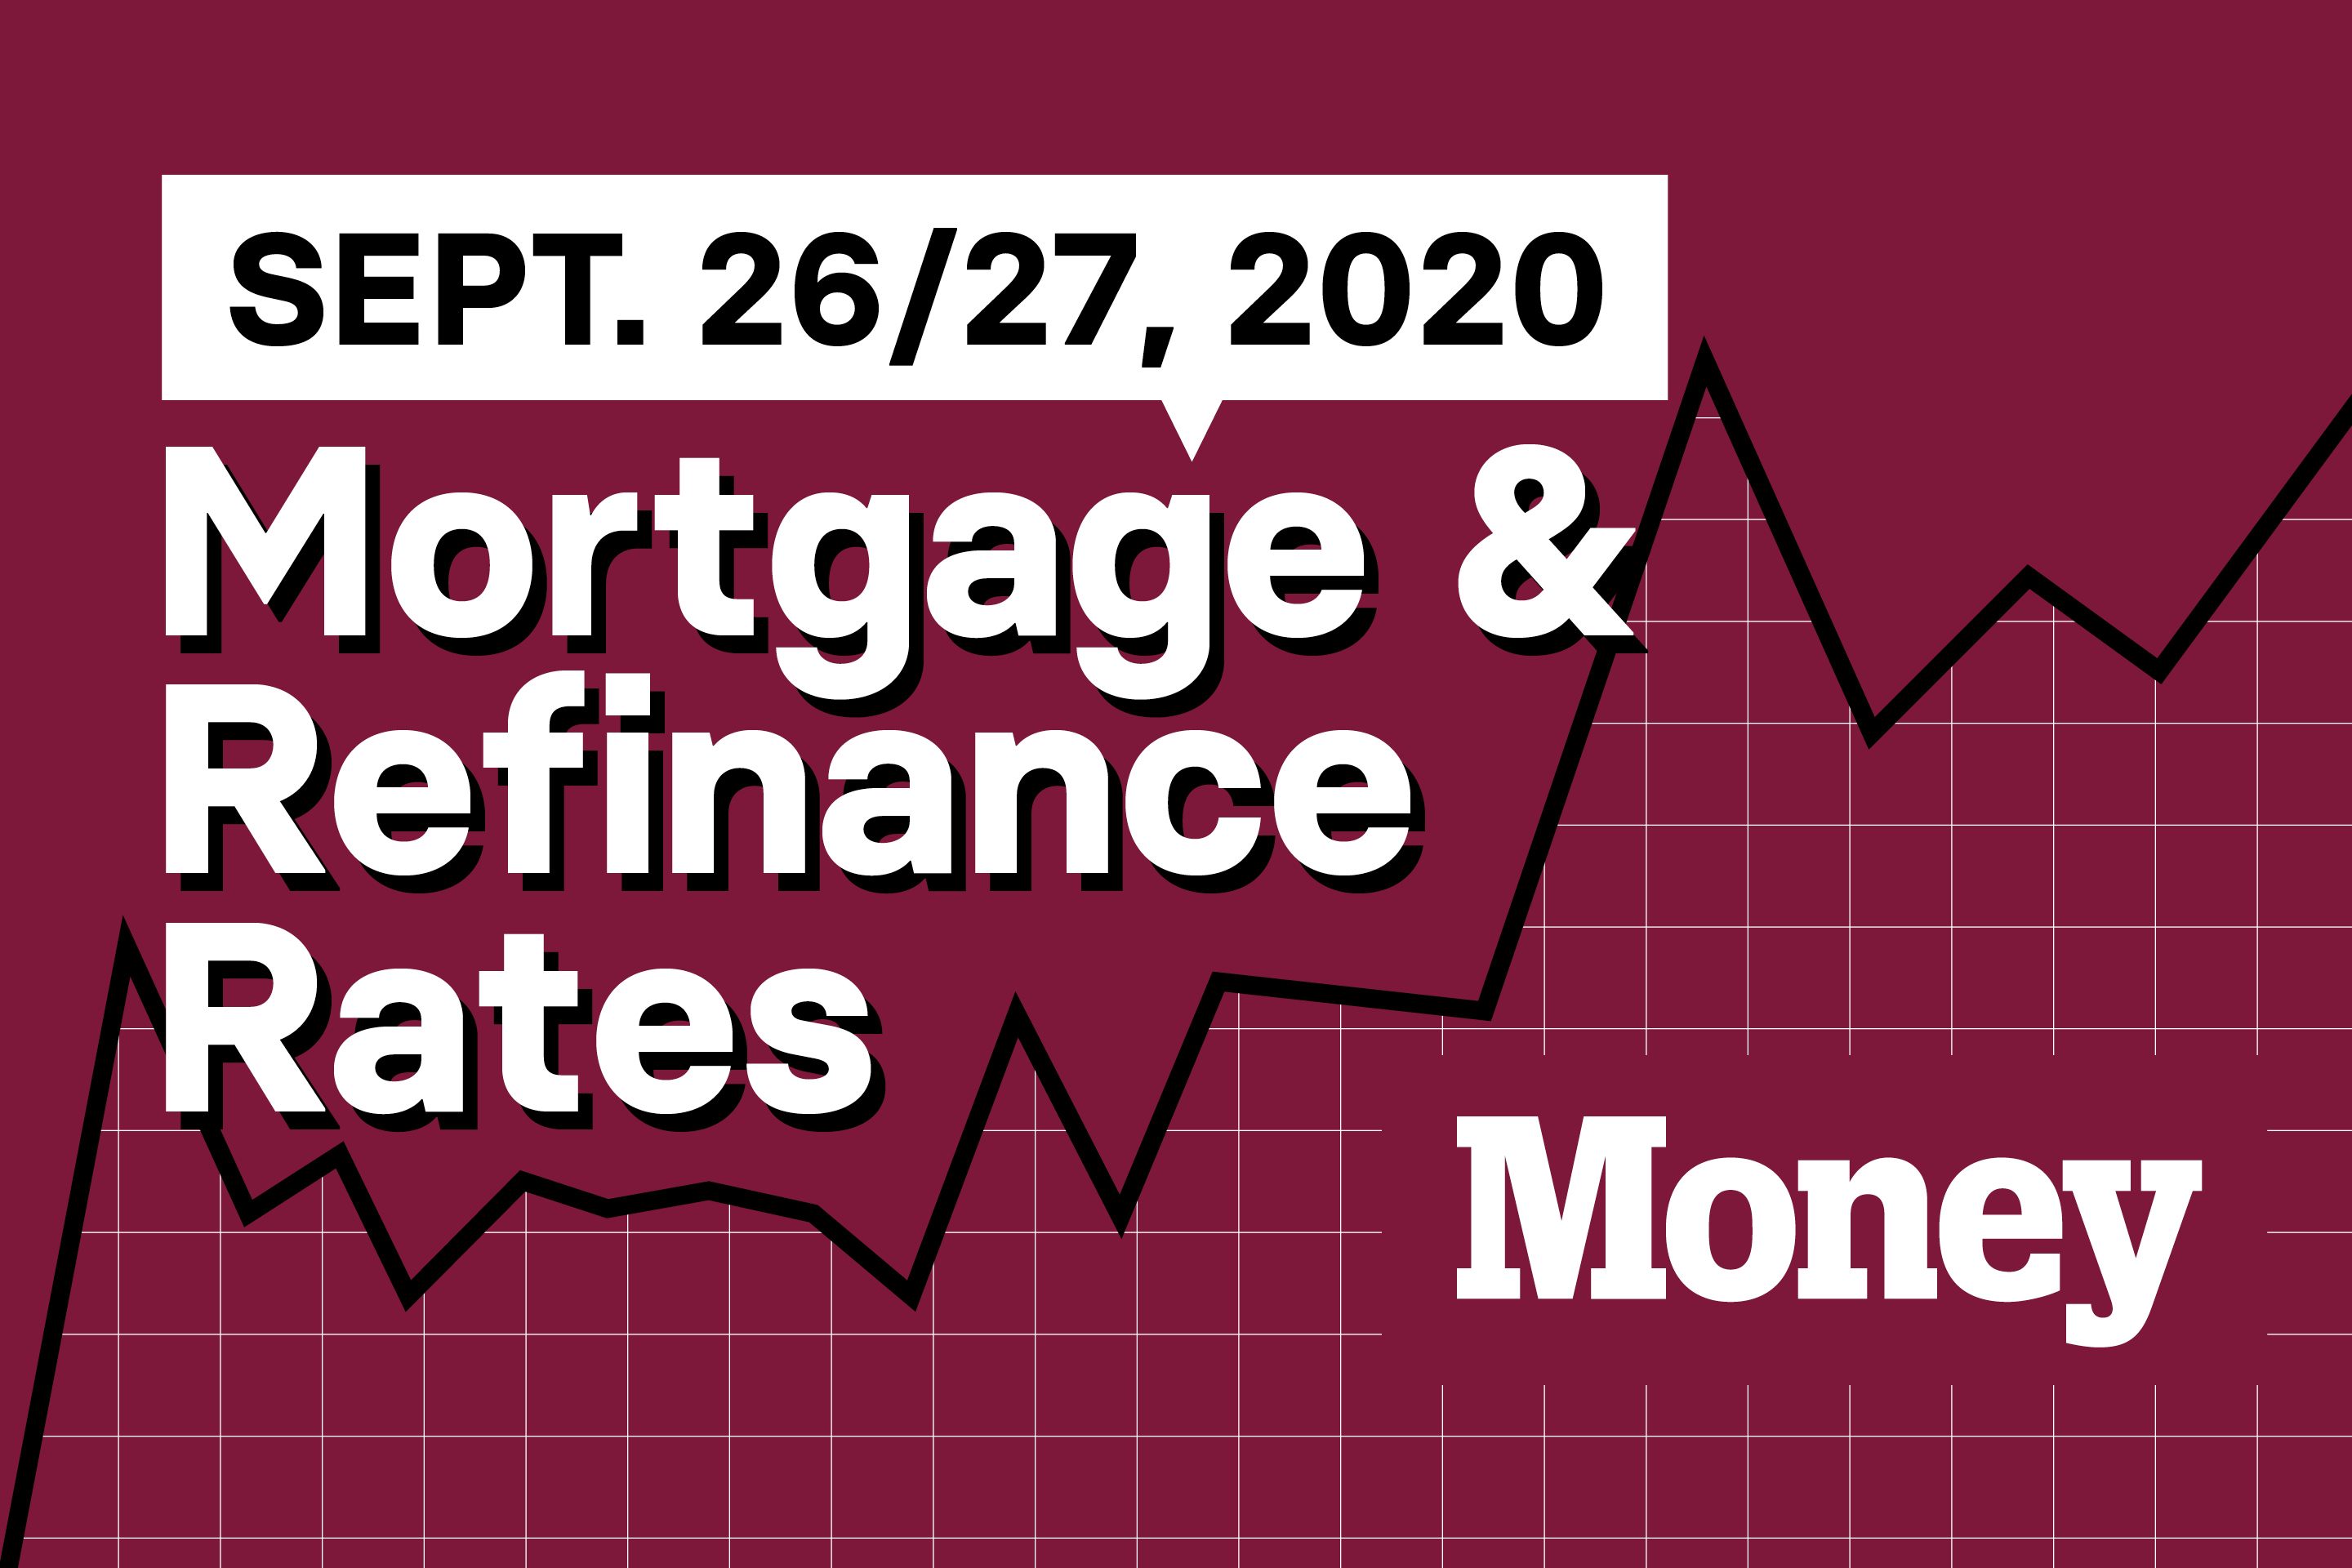 Today’s Best Mortgage & Refinance Rates for September 26-27 | Money